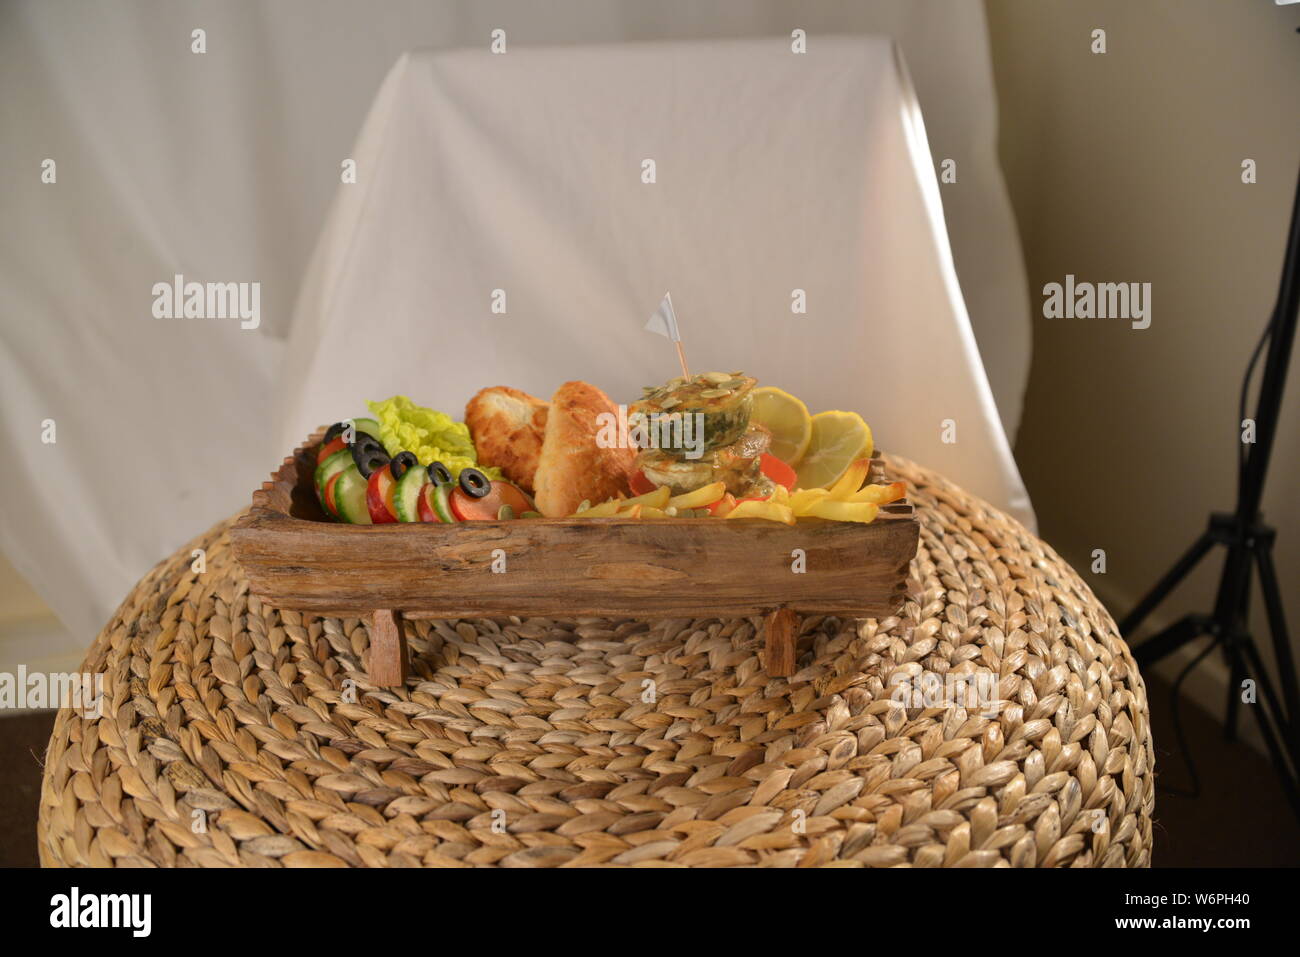 basket full of foods serving food with chips fries olives vegetarians vegan cucumber lime fast food and unhealthy foods junk foods bread beauty Stock Photo